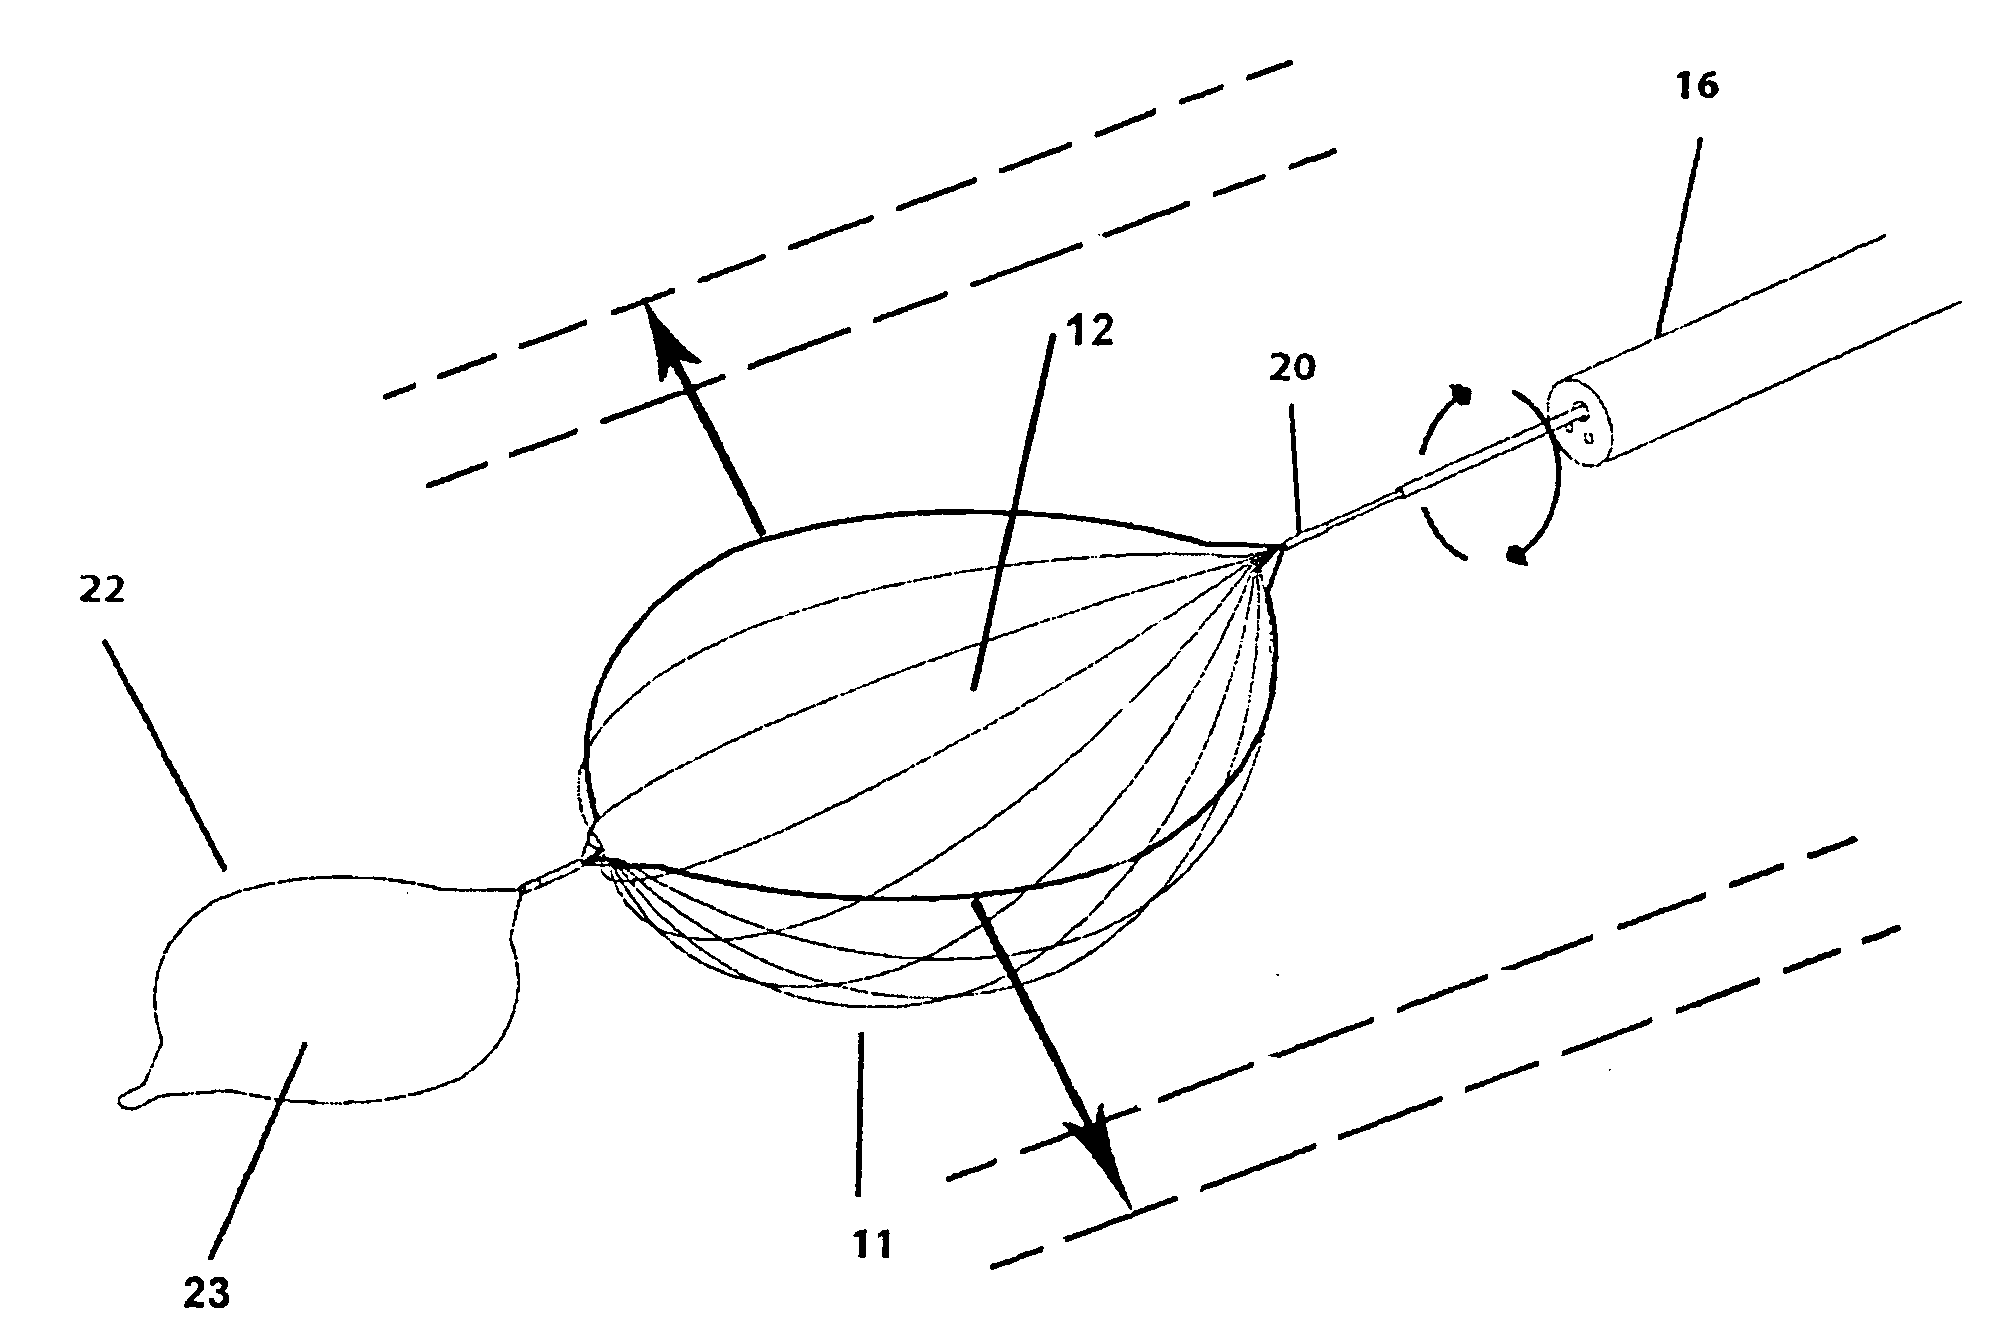 Surgical retrieval device and method